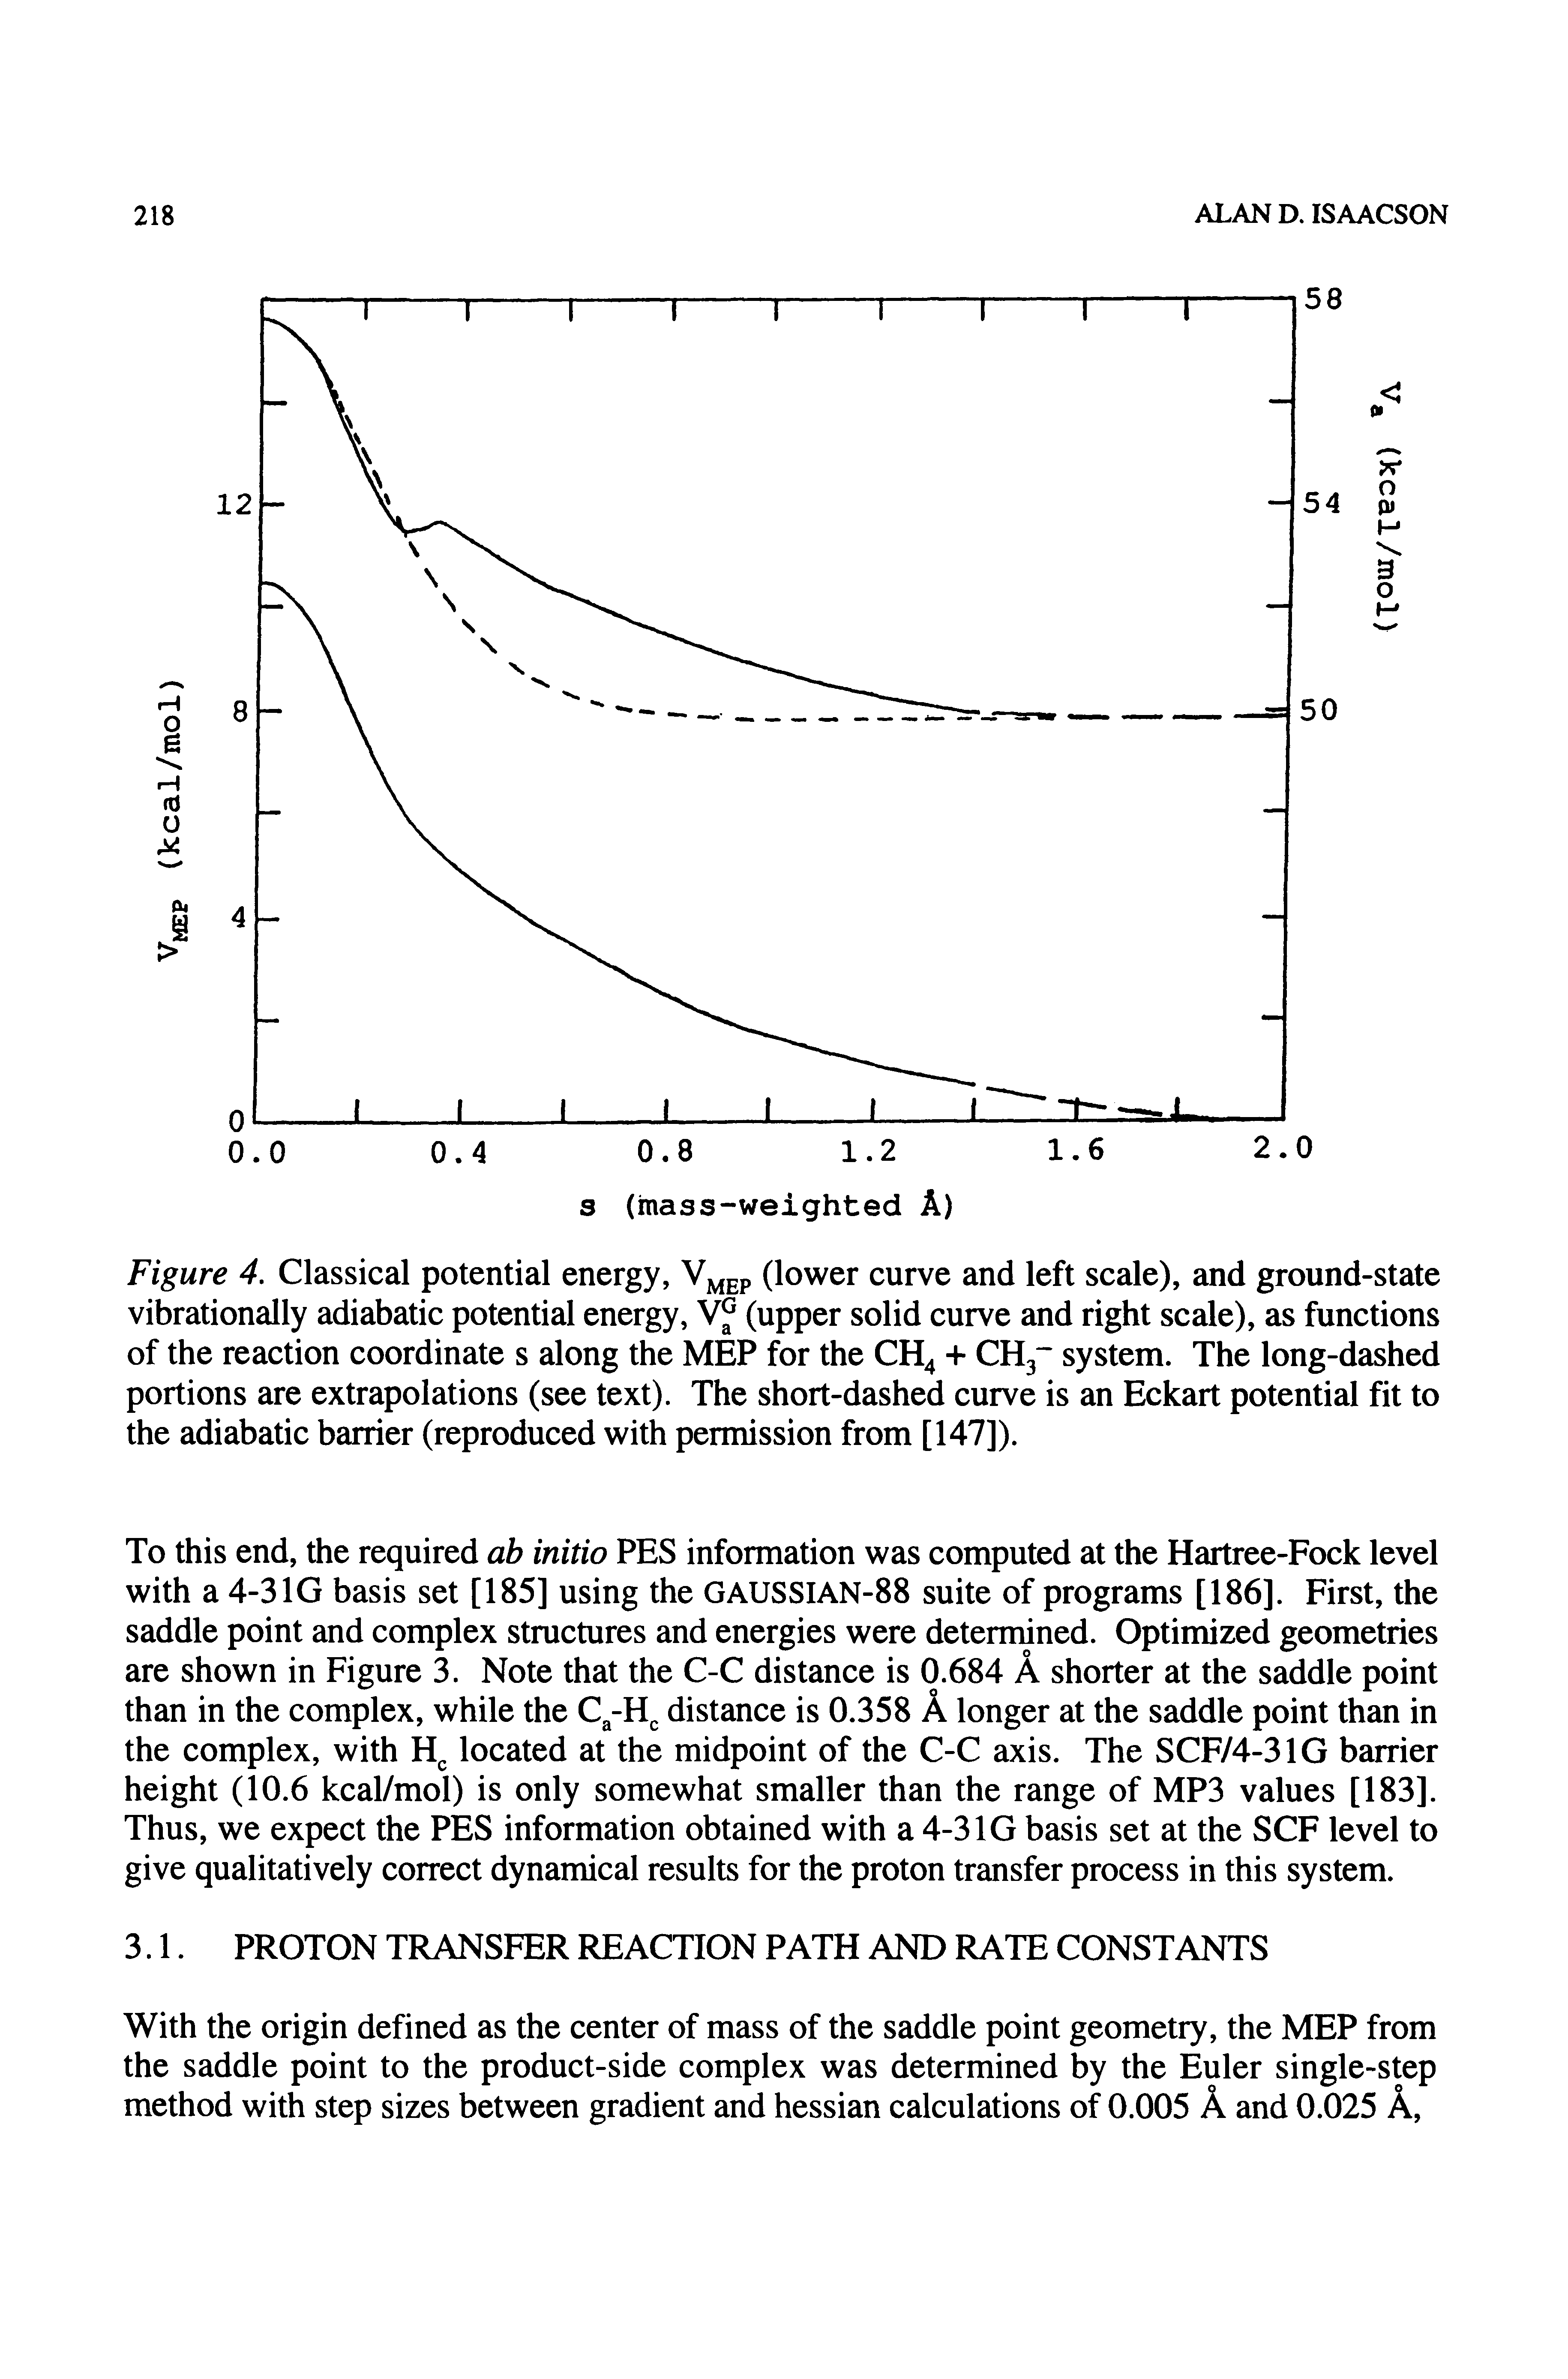 Figure 4. Classical potential energy, Vj p (lower curve and left scale), and ground-state vibrationally adiabatic potential energy, (upper solid curve and right scale), as functions of the reaction coordinate s along the MEP for the CH4 + system. The long-dashed portions are extrapolations (see text). The short-dashed curve is an Eckart potential fit to the adiabatic barrier (reproduced with permission from [147]).